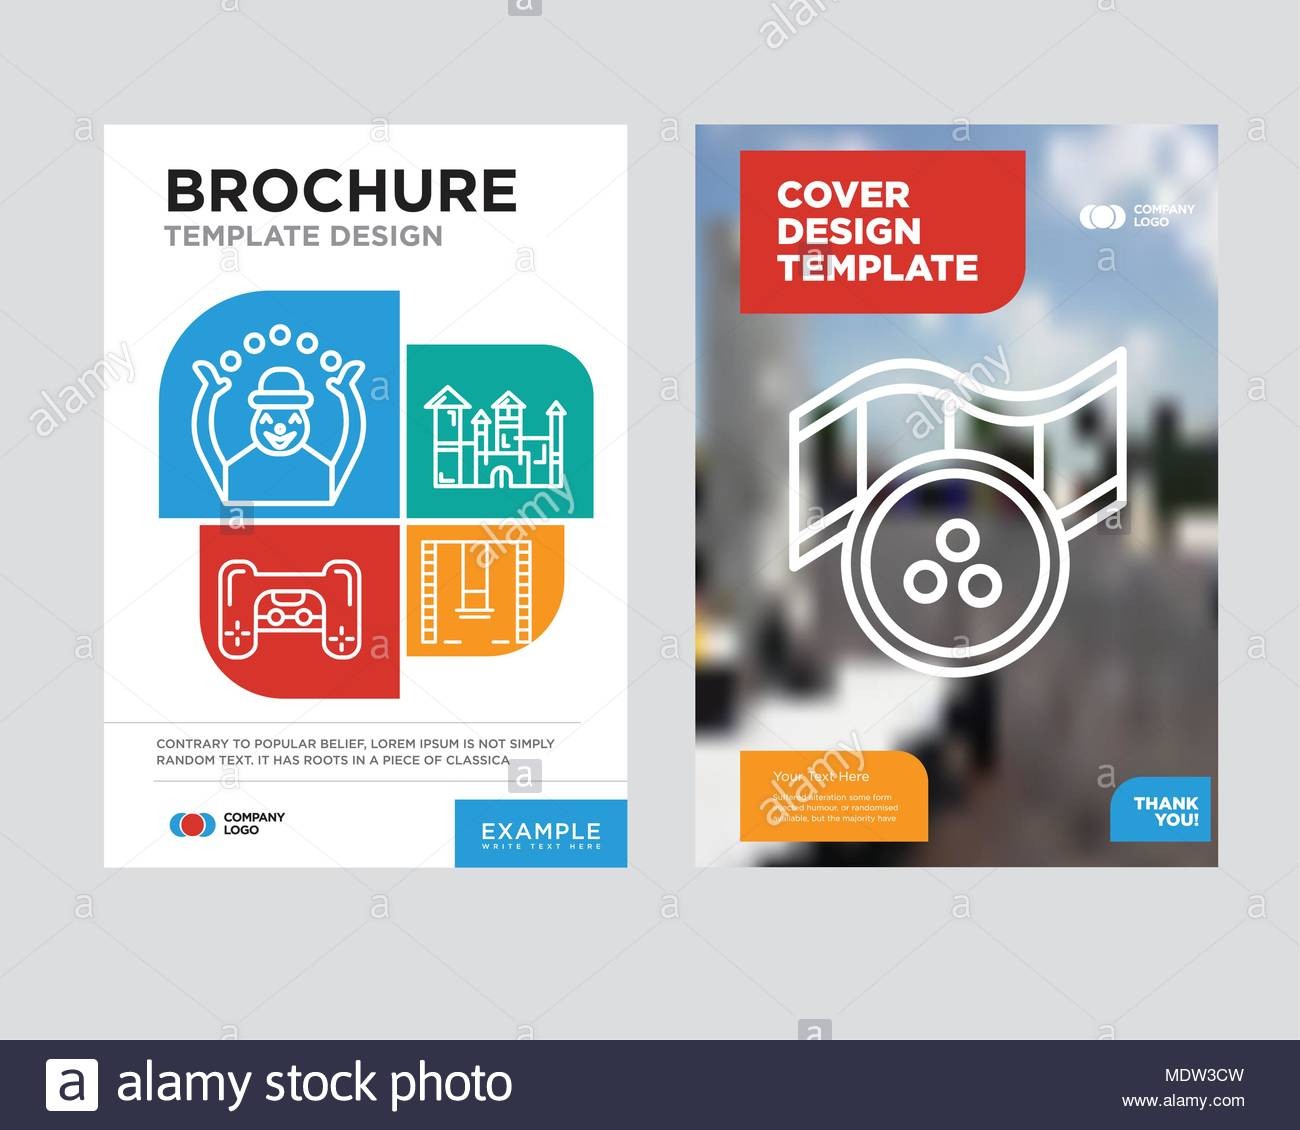 Movie Brochure Flyer Design Template With Abstract Photo Background